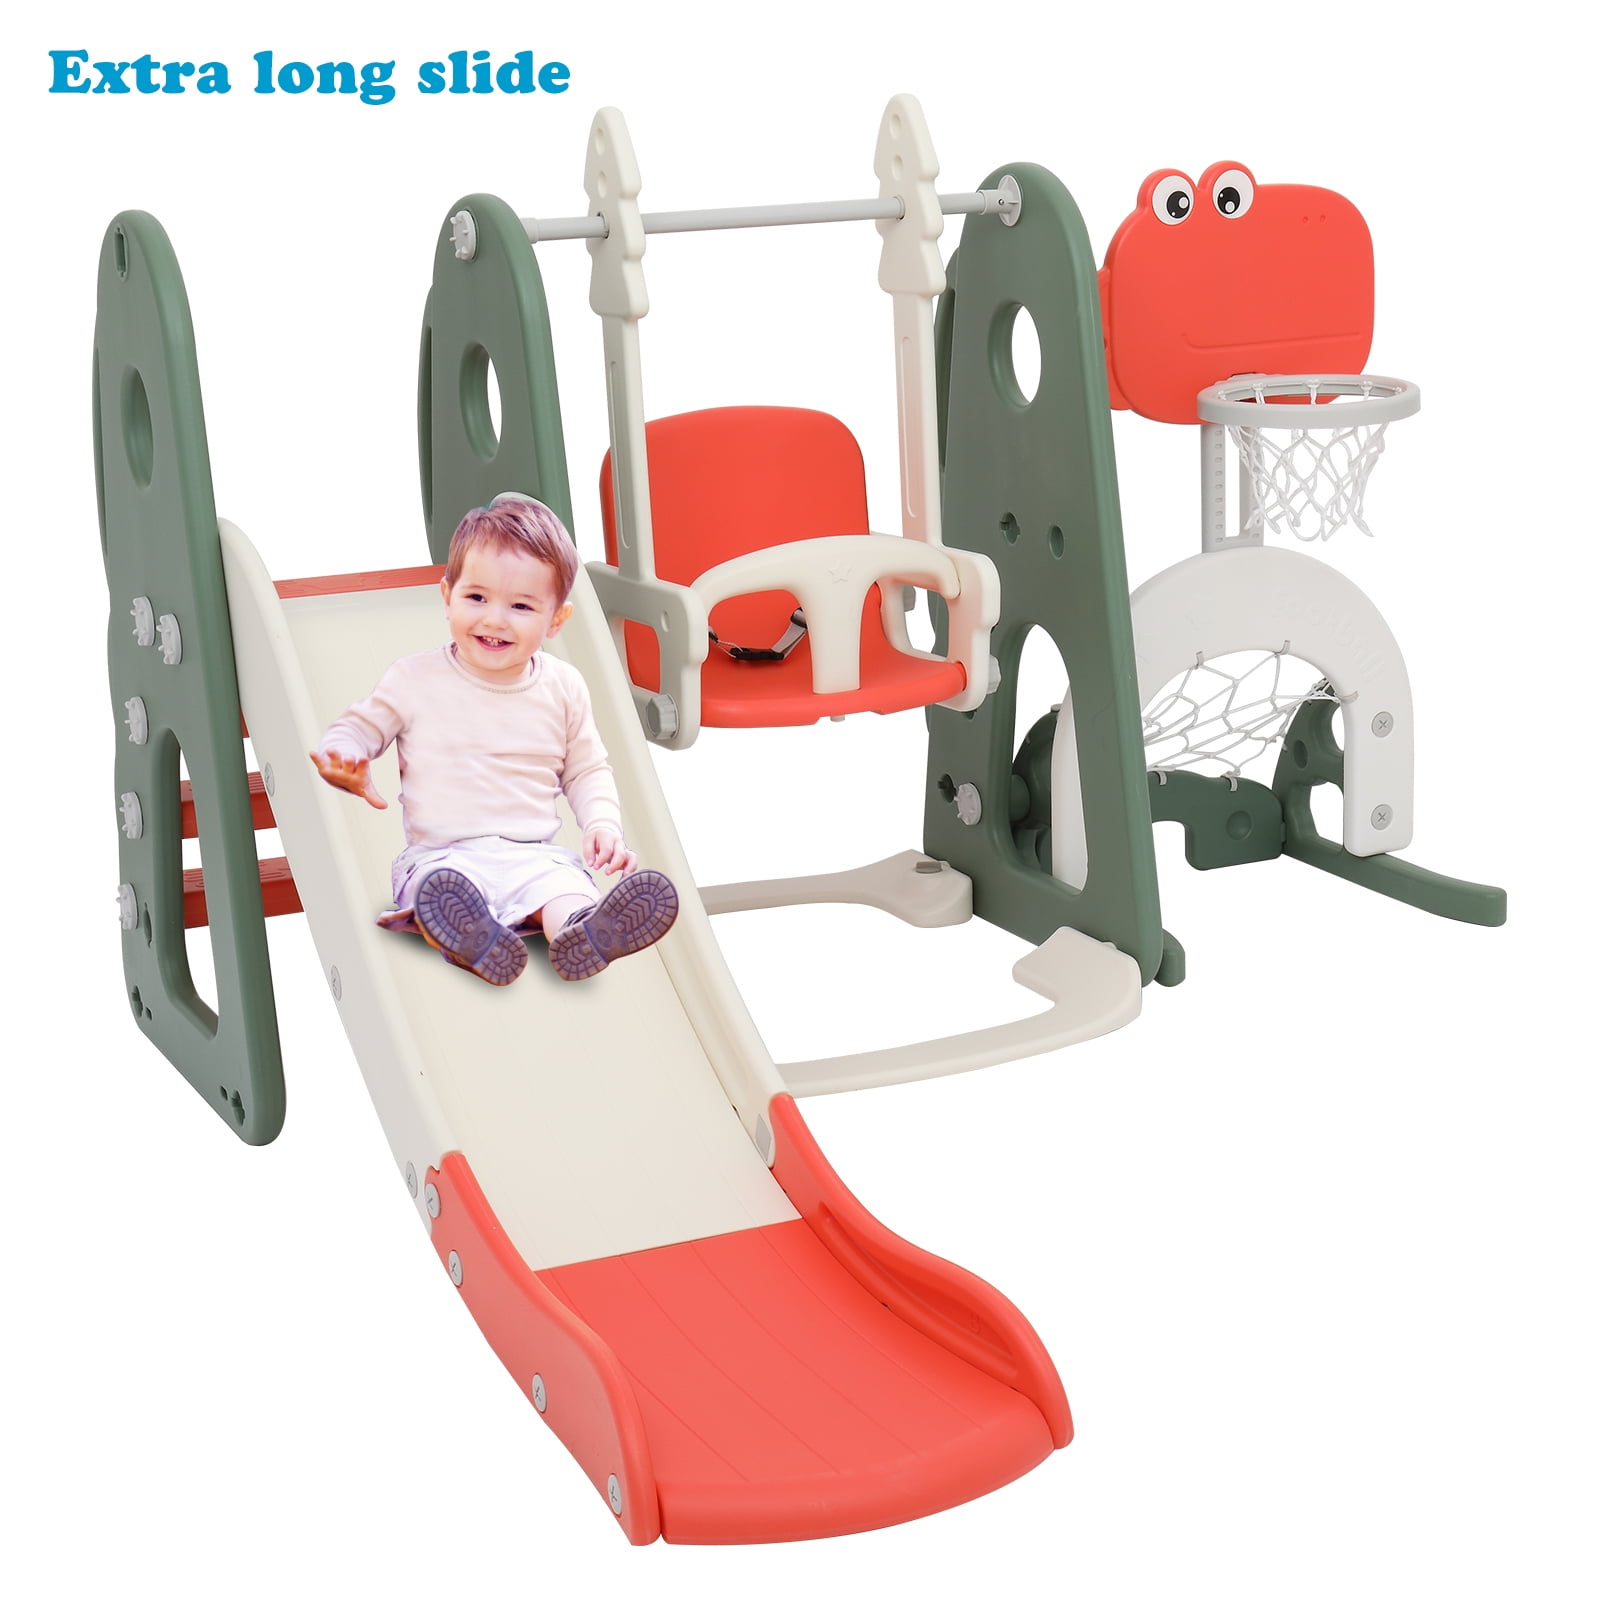 Toddler Climber Toy Set Sturdy Fun Kids Slide In/Outdoor Family Baby Playground